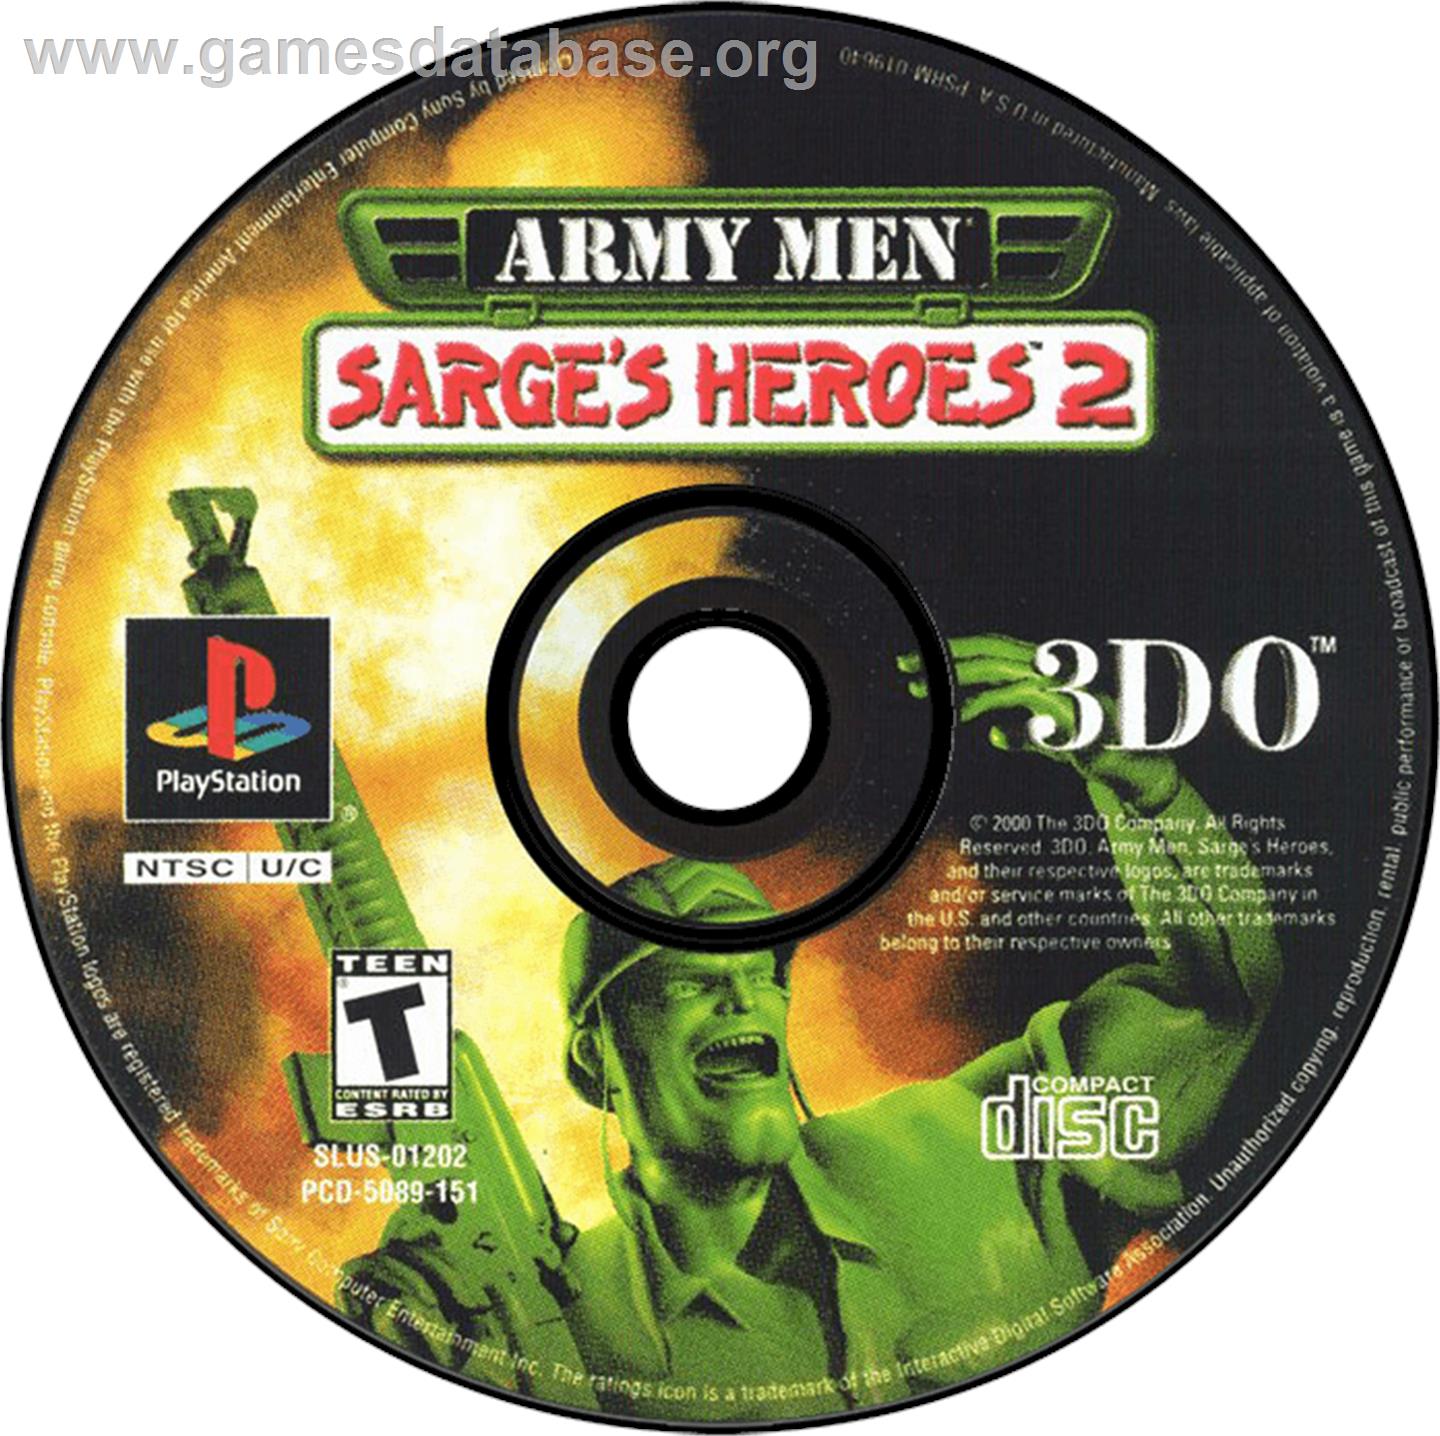 Army Men: Sarge's Heroes 2 - Sony Playstation - Artwork - Disc